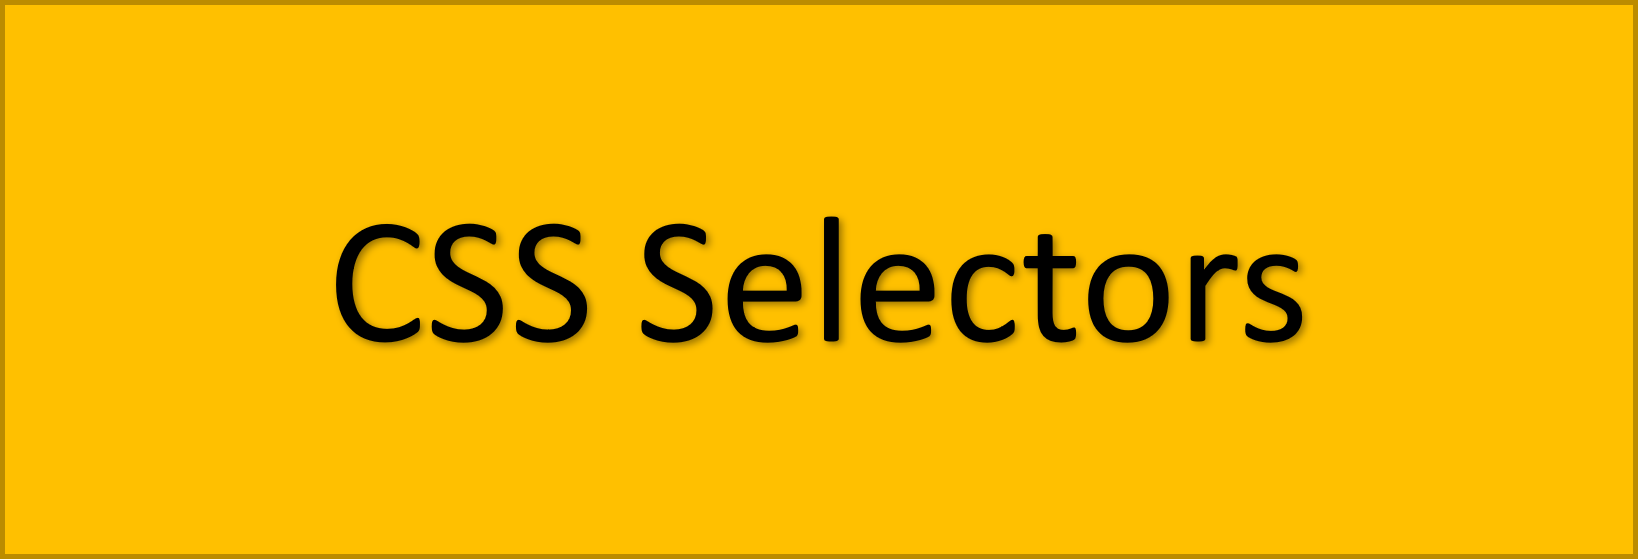 How to use CSS selectors